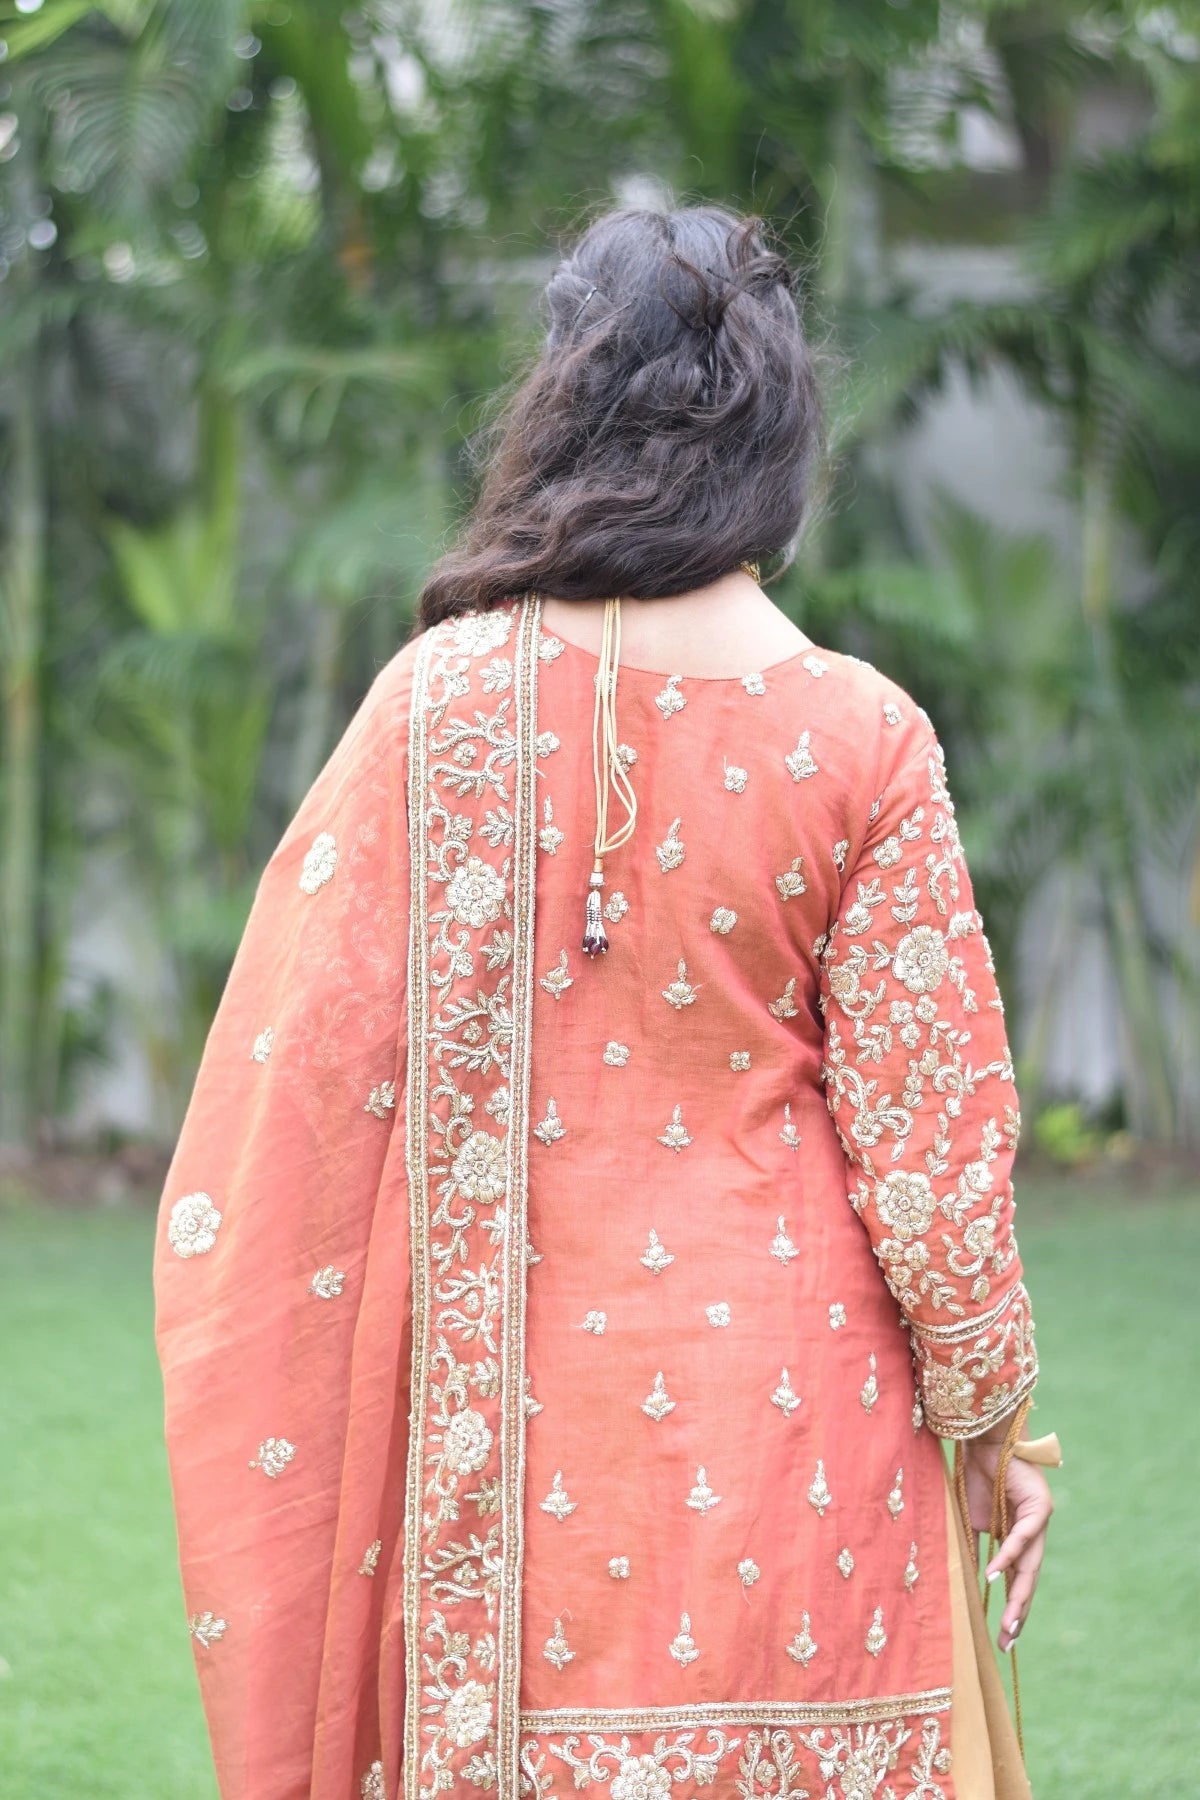 A lady dressed in a classic farshi gharara with golden rust detailing.